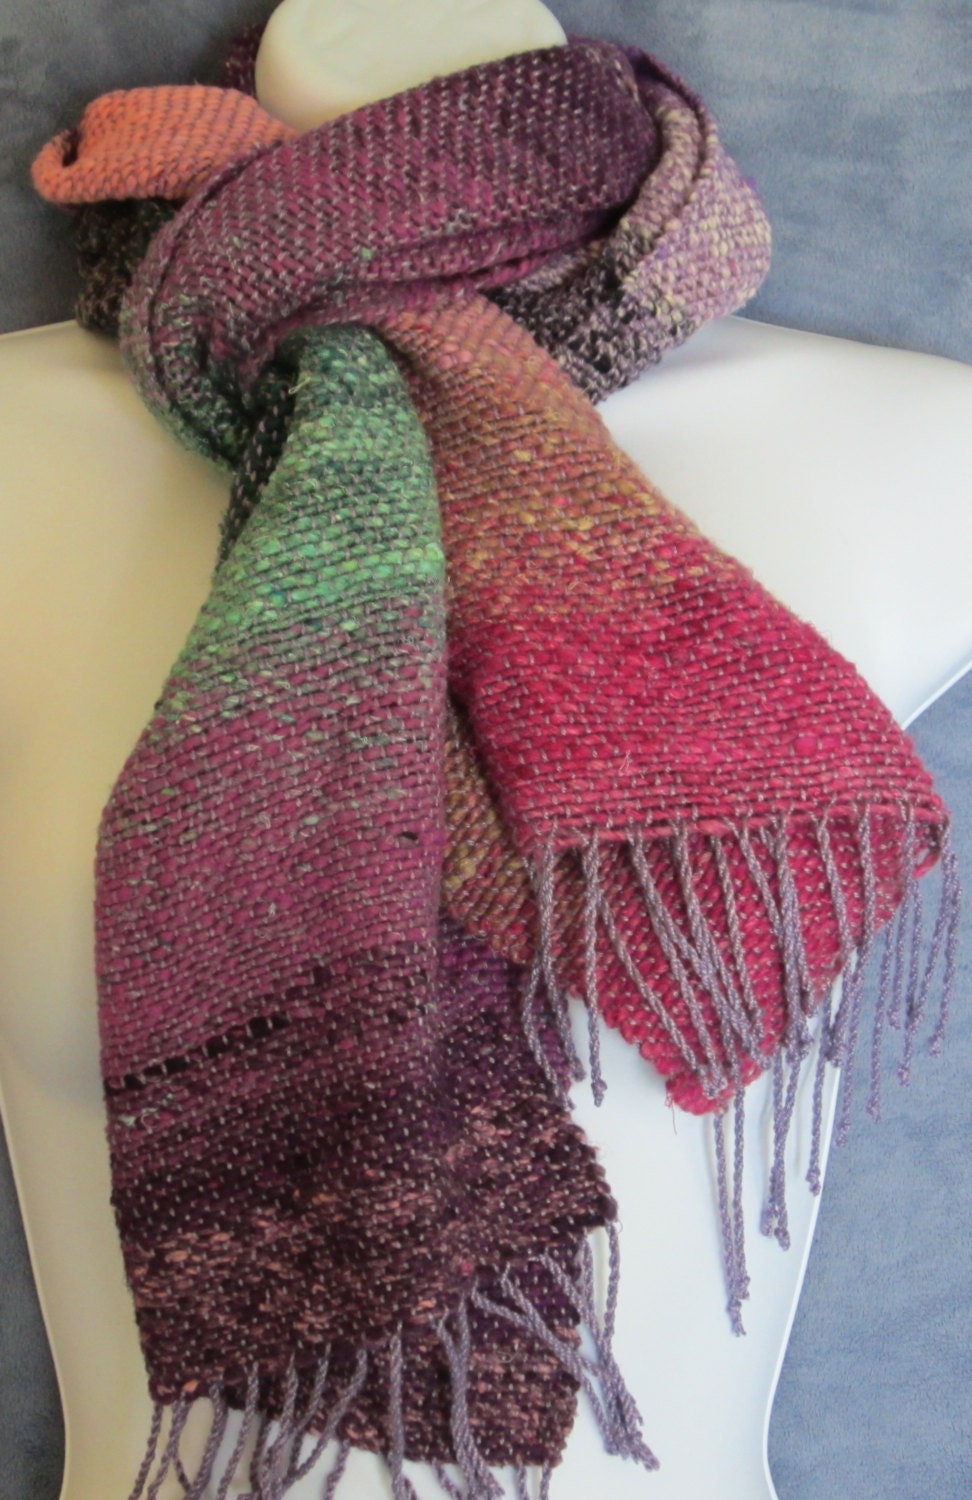 Jasper Handwoven Cotton Silk Wool and Bamboo Scarf - Etsy